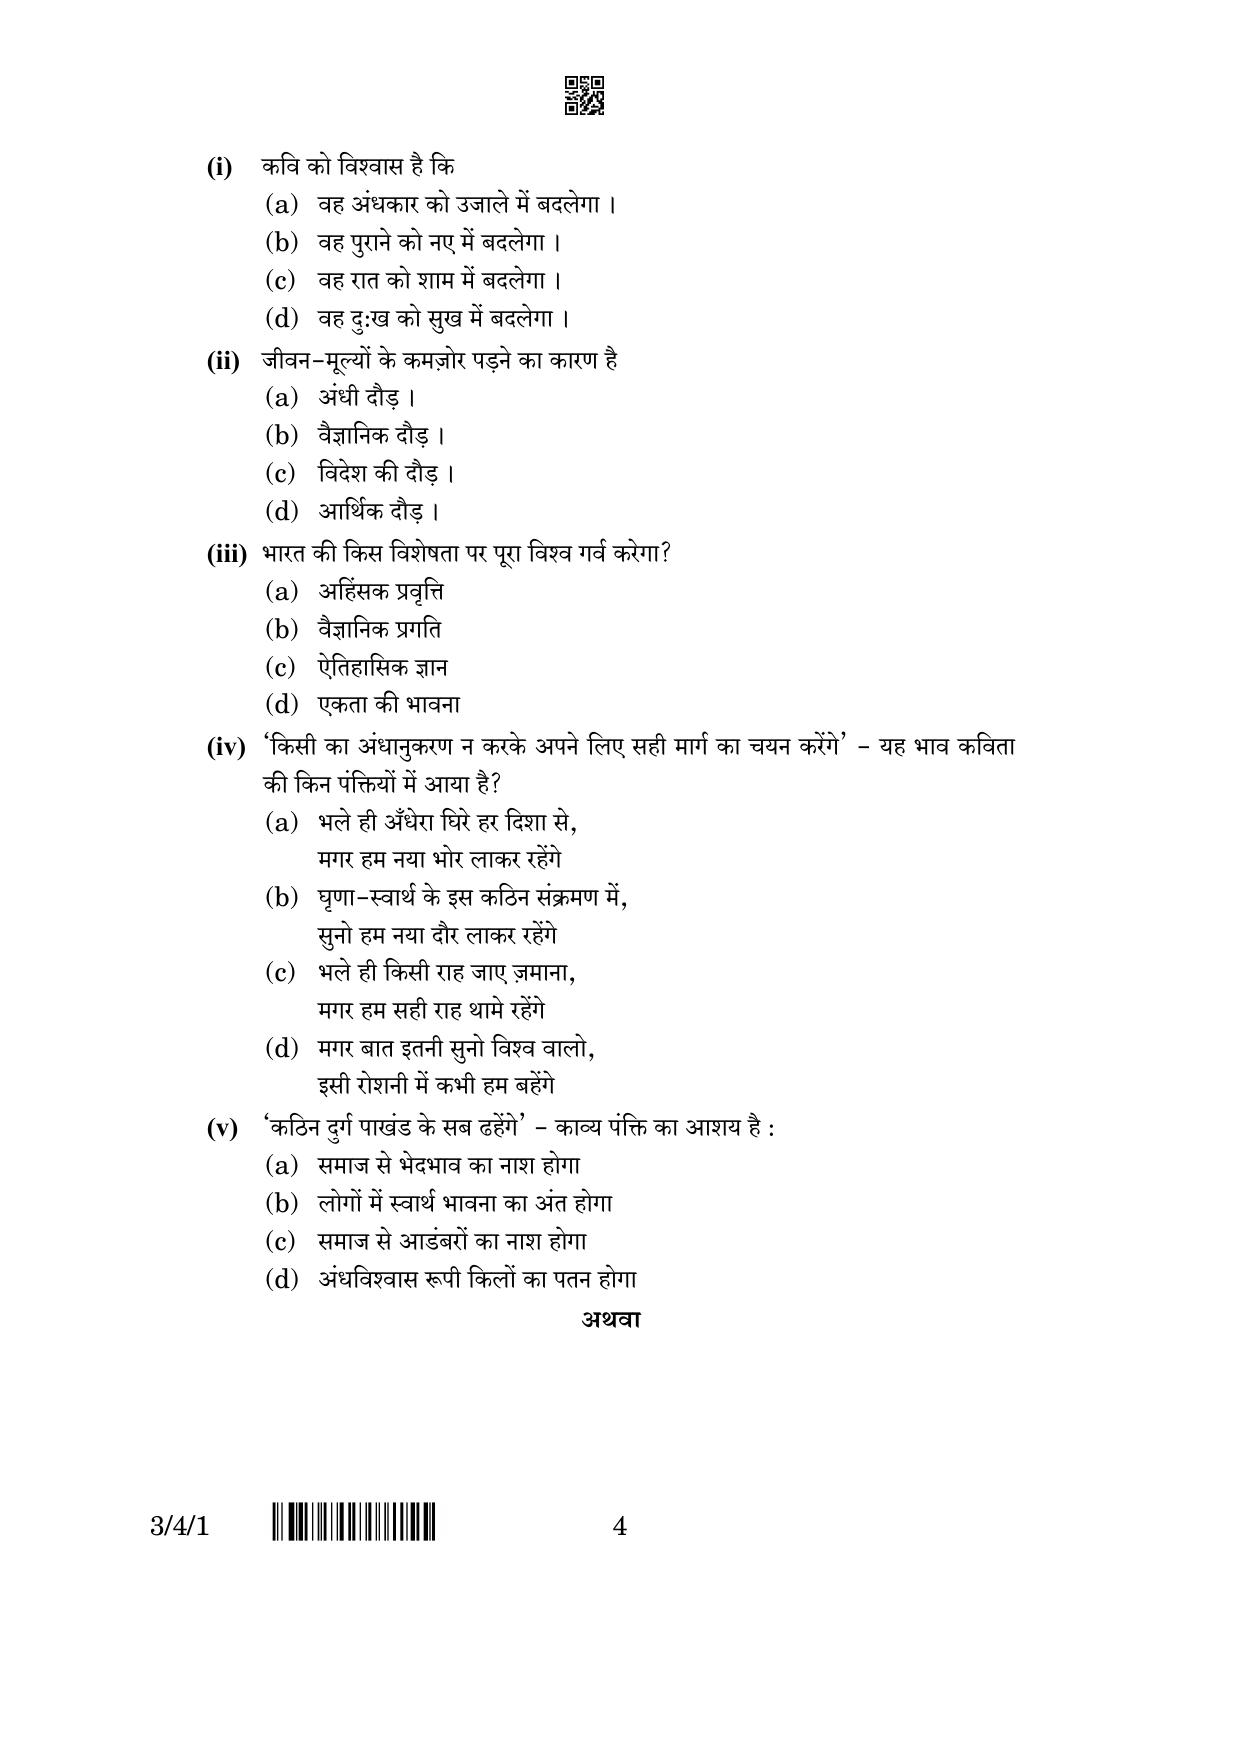 CBSE Class 10 3-4-1 Hindi A 2023 Question Paper - Page 4